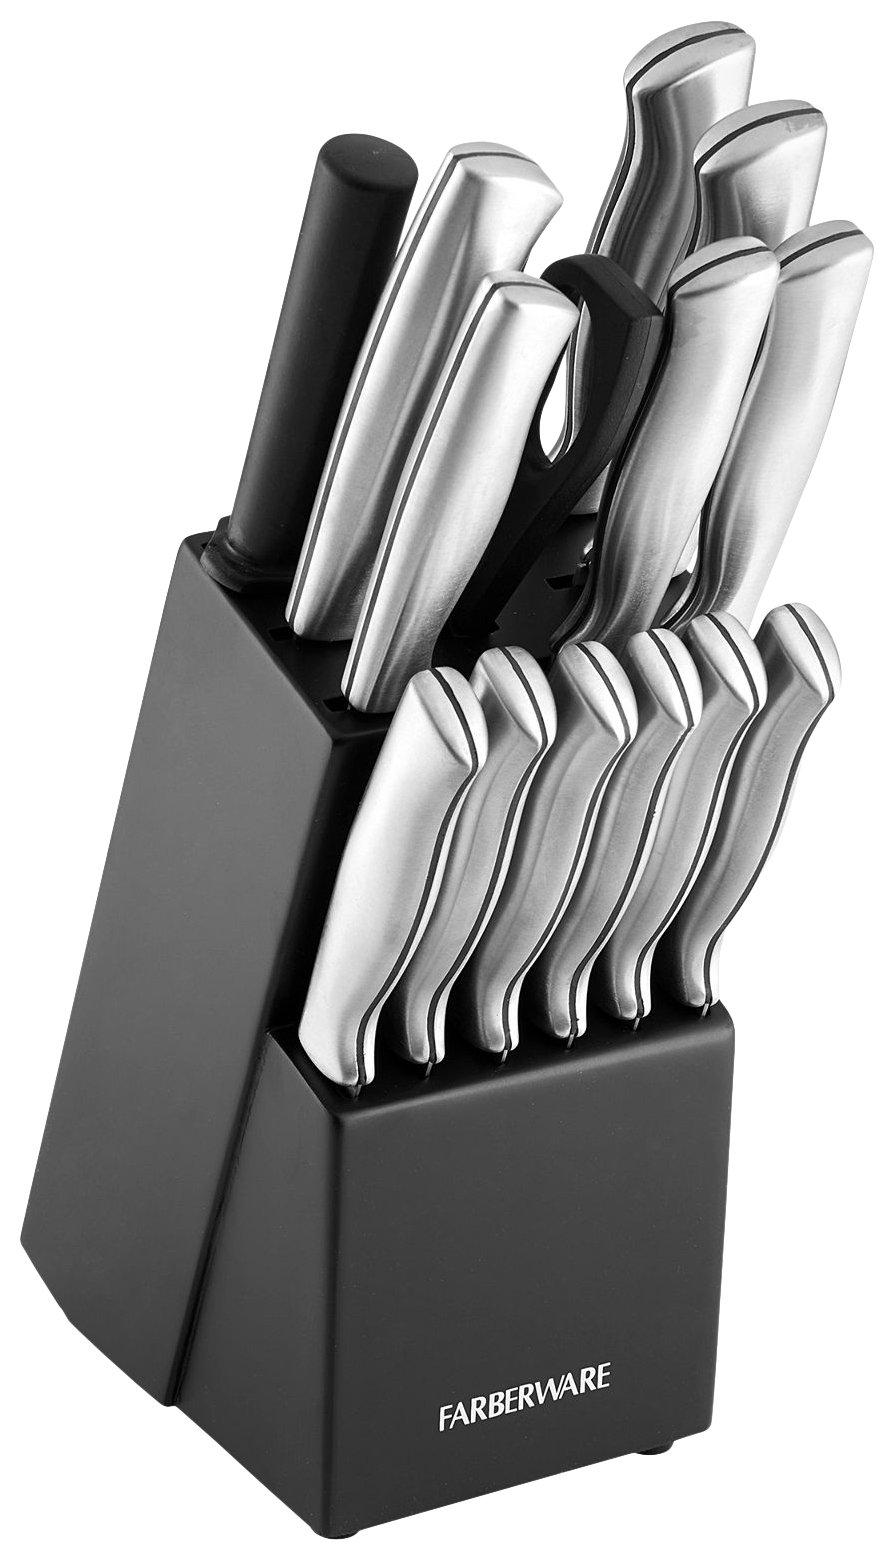 15-pc. Stainless Steel Cutlery Set